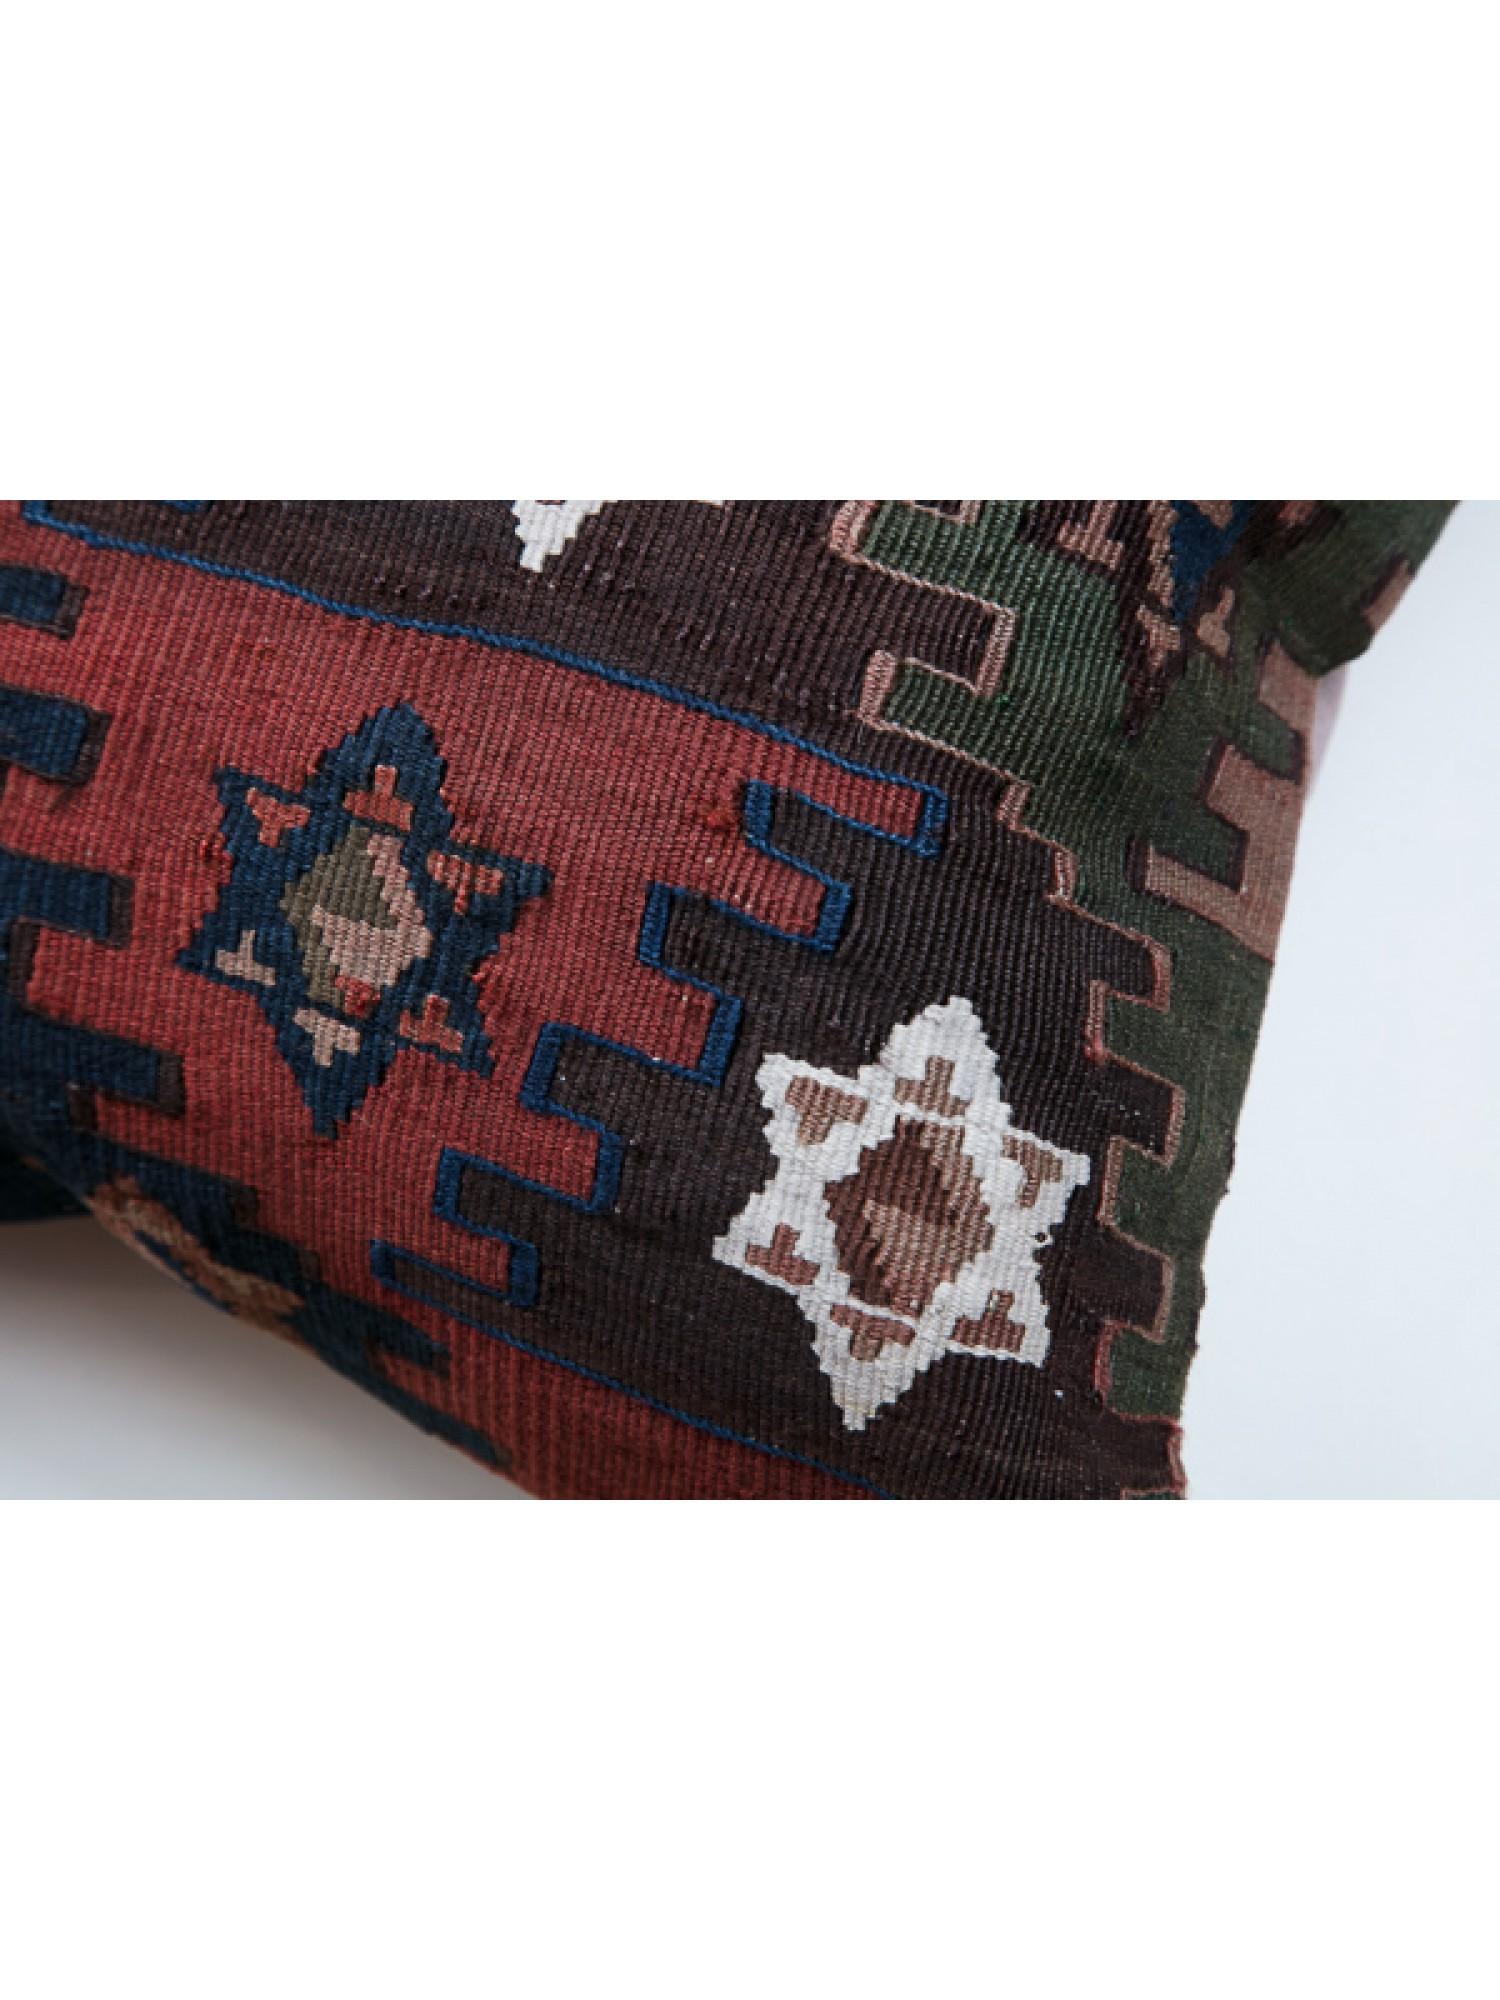 Contemporary Antique & Old Kilim Cushion Cover, Anatolian Yastik Turkish Modern Pillow KC3490 For Sale